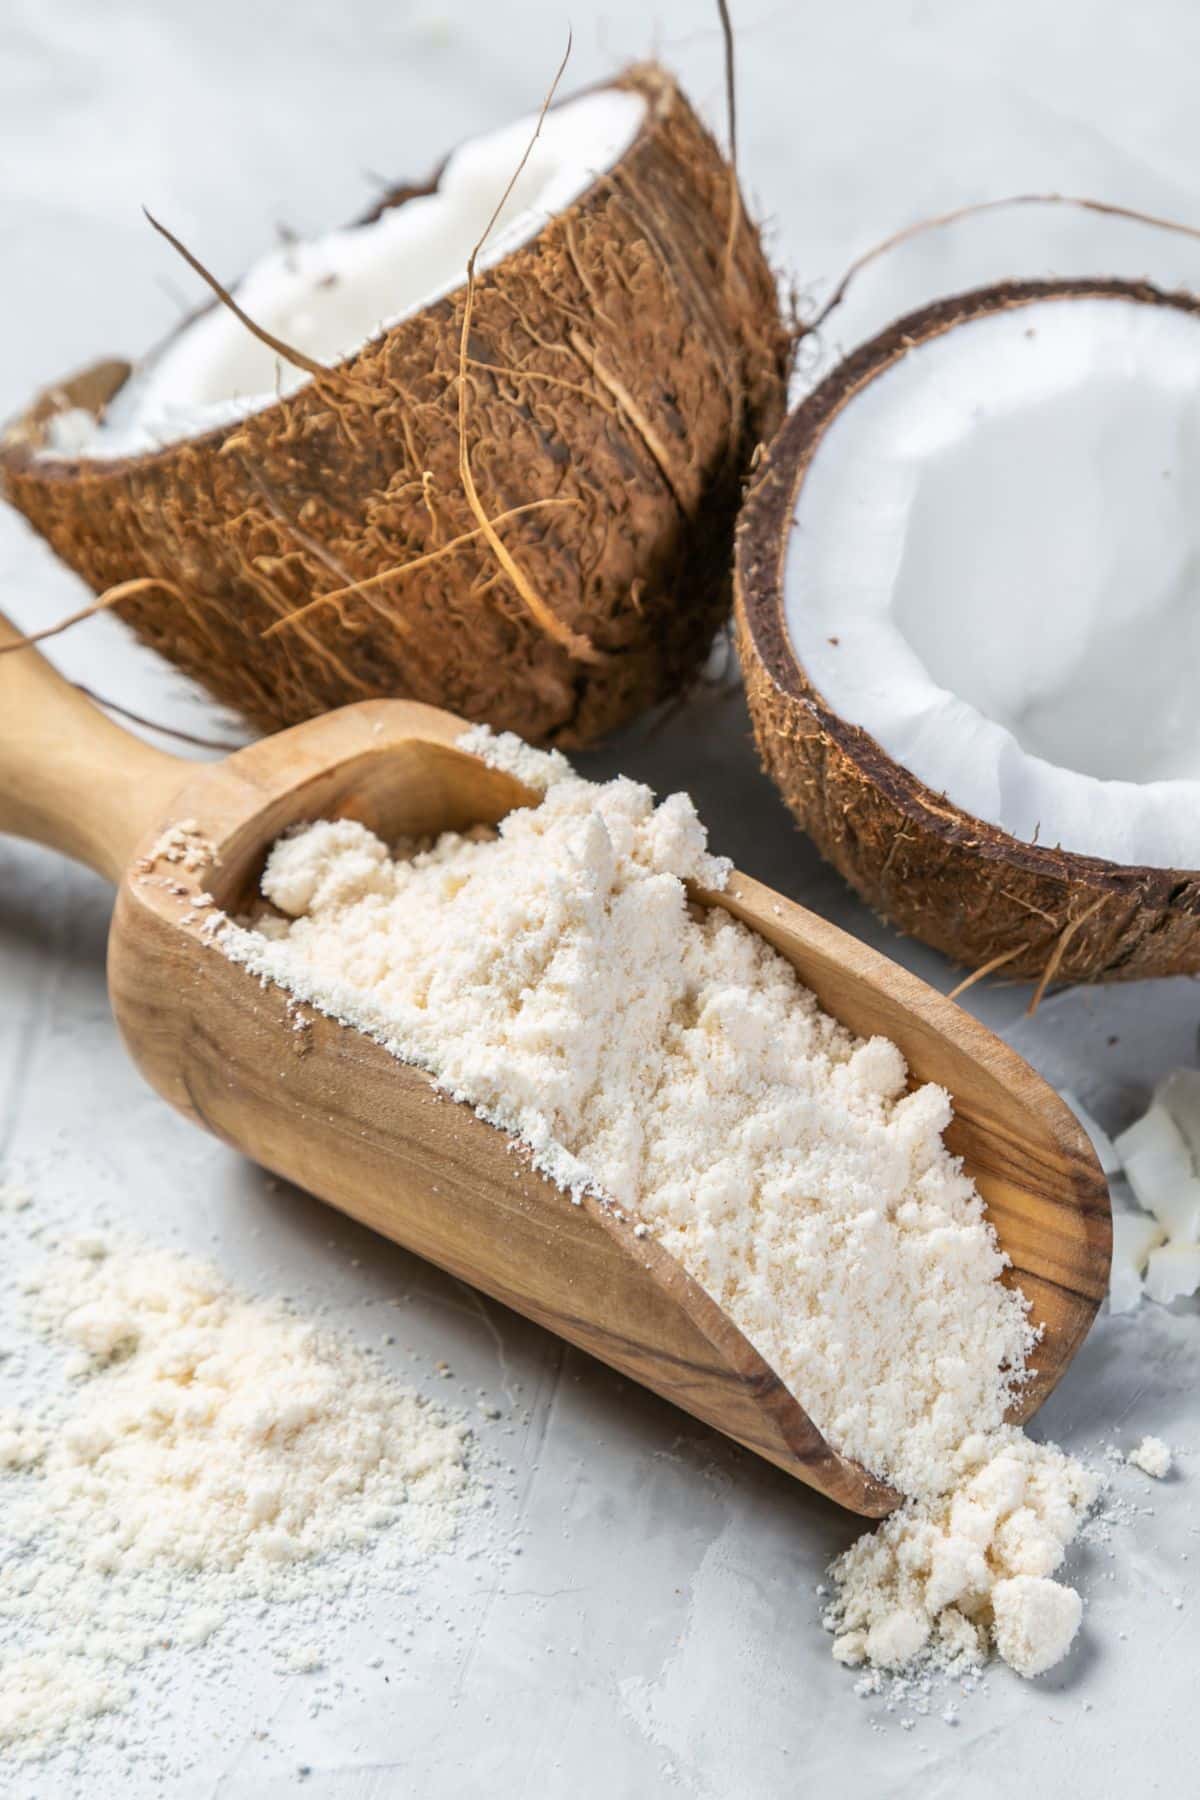 Scoop of coconut flour on wooden surface with halved coconuts.